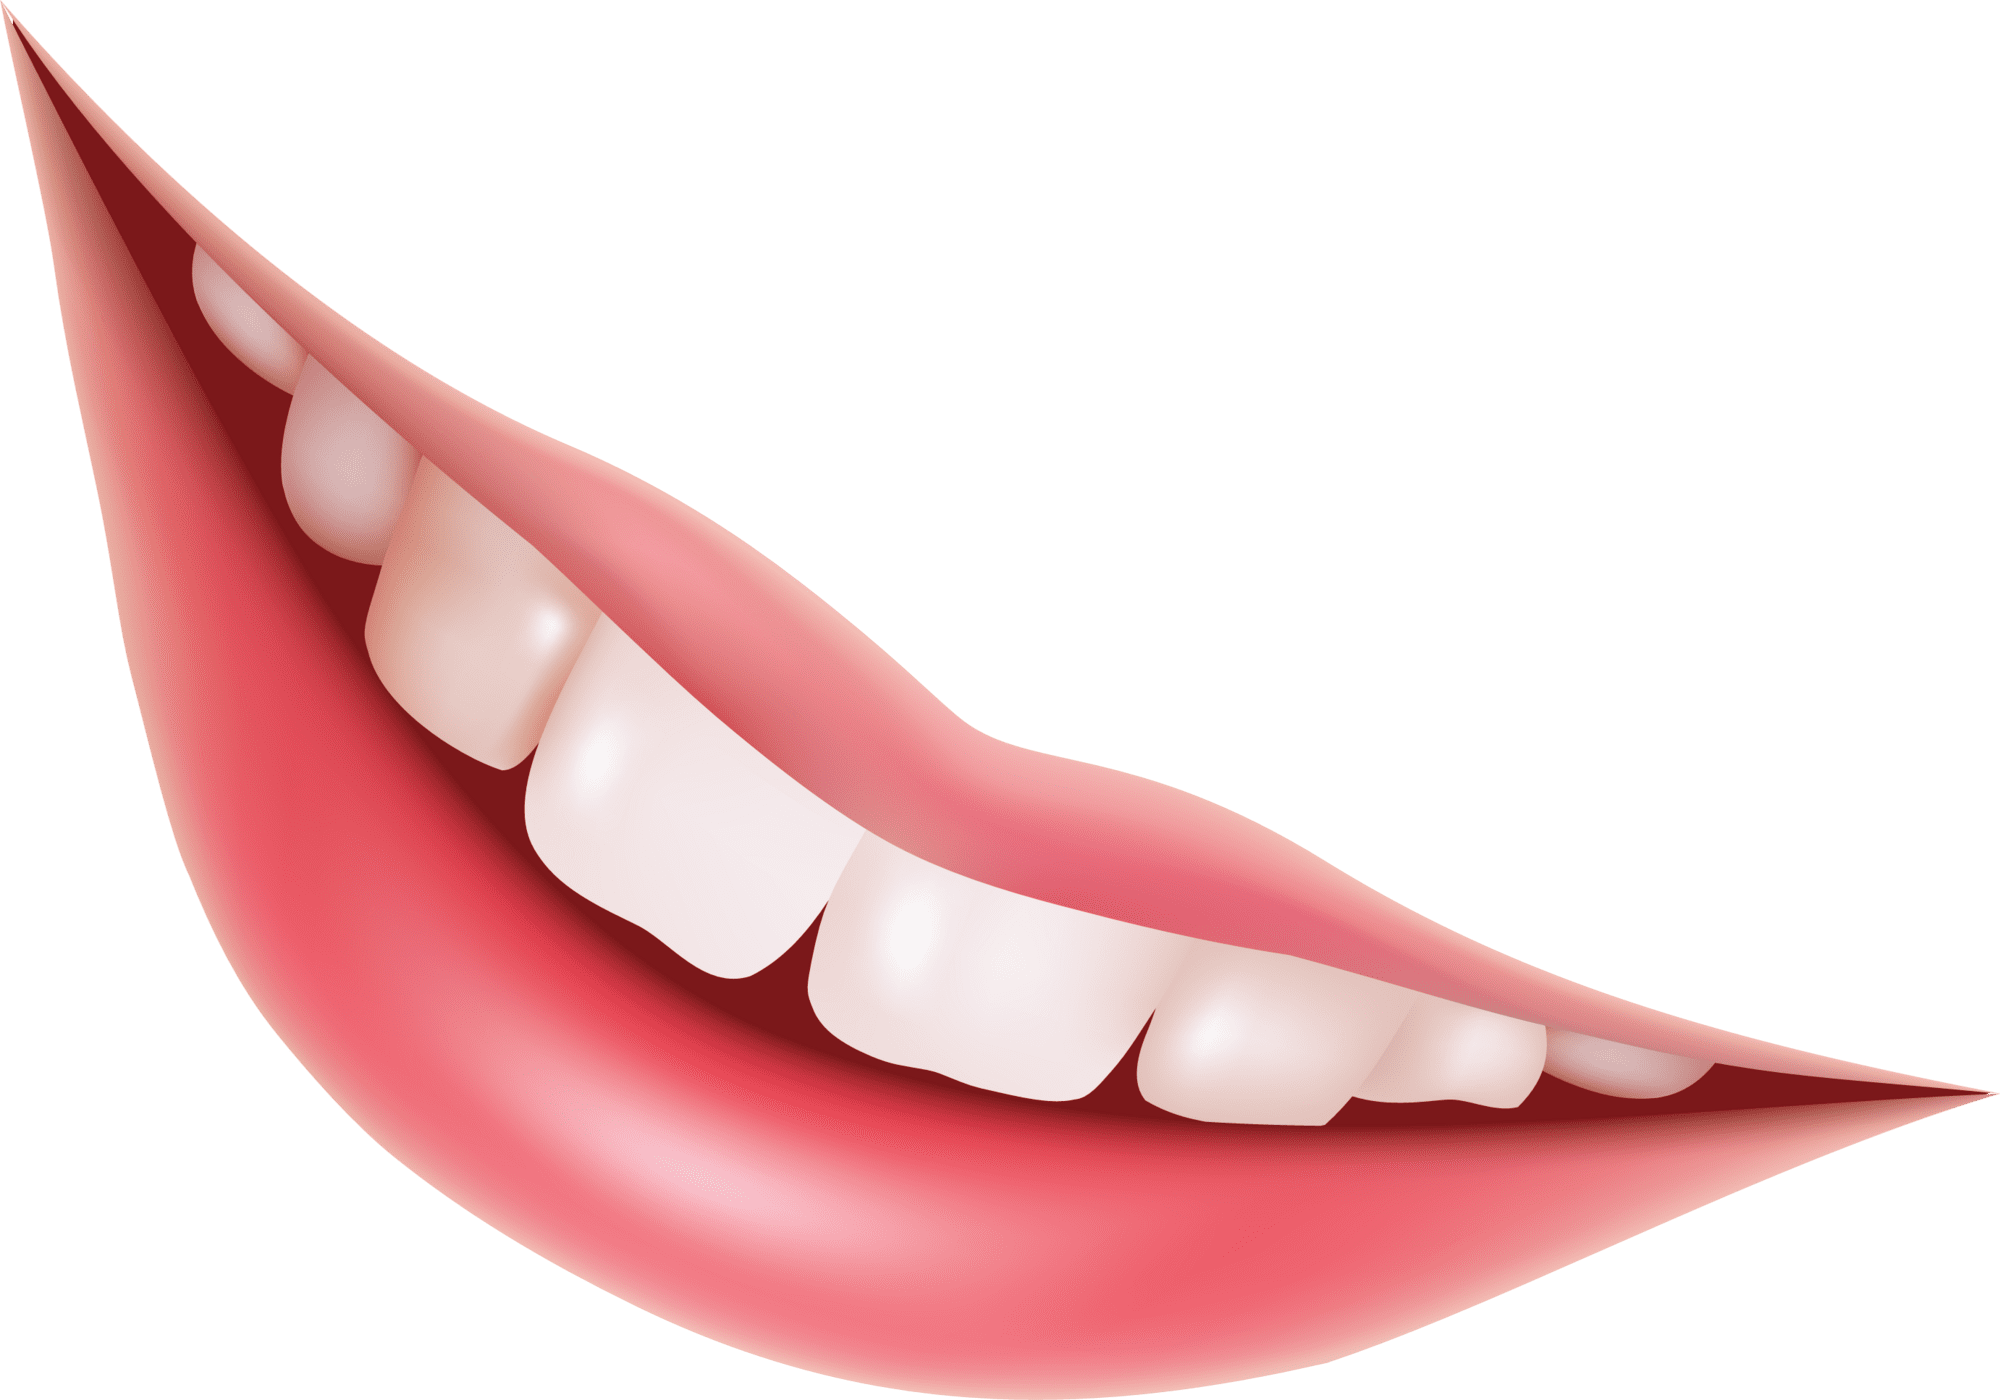 Teeth image size clipart